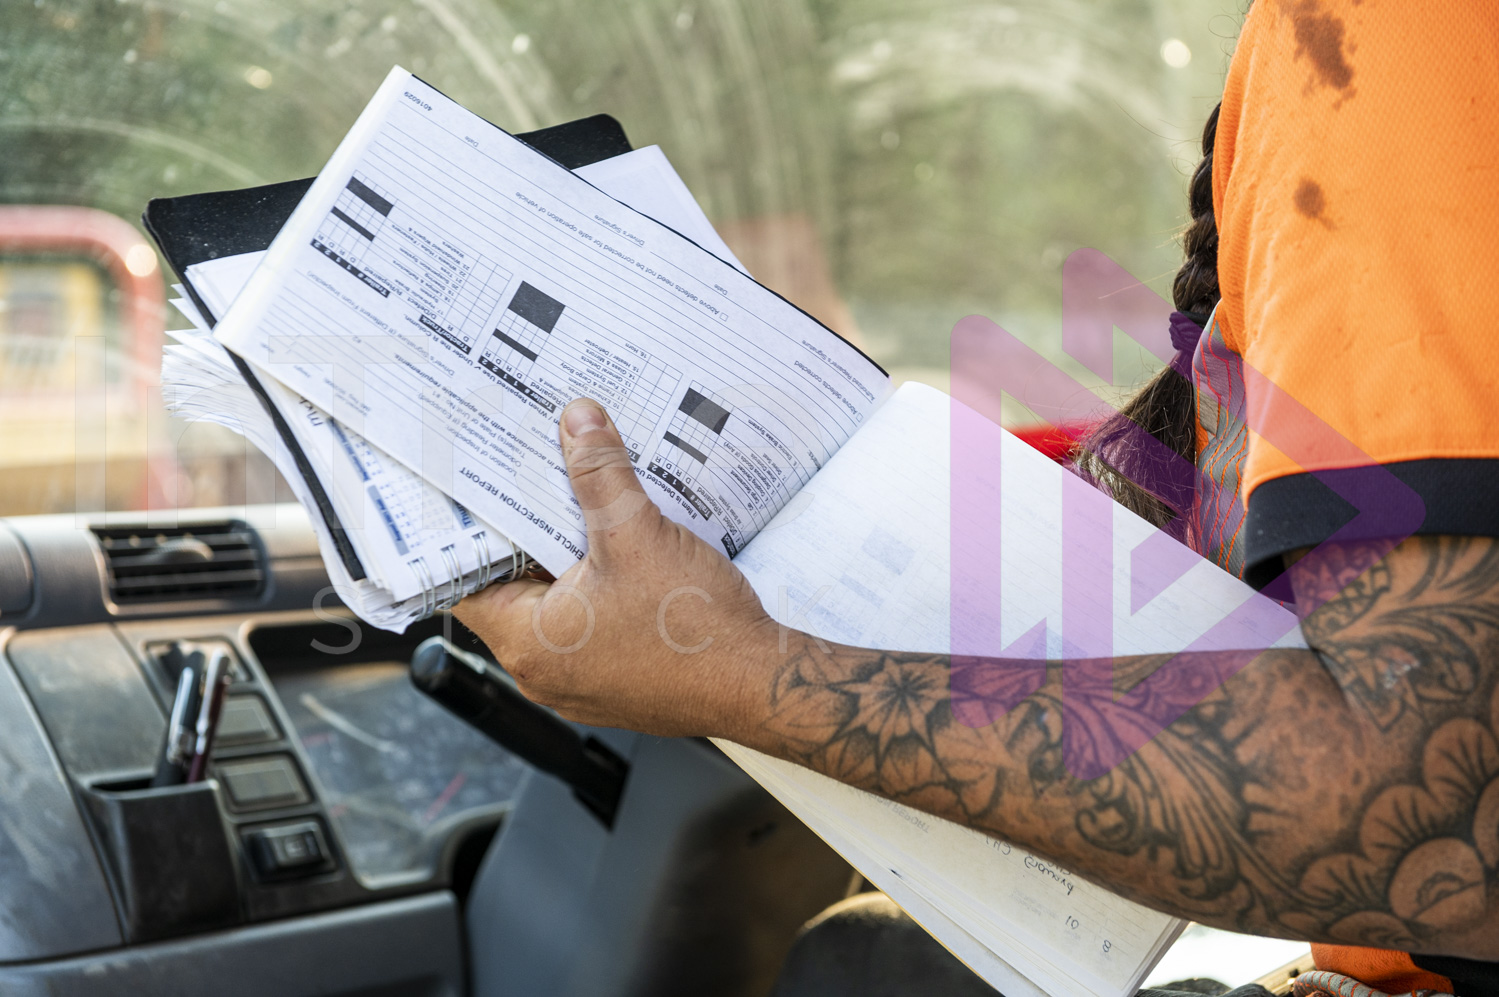 Vehicle inspection report form held in female's hand